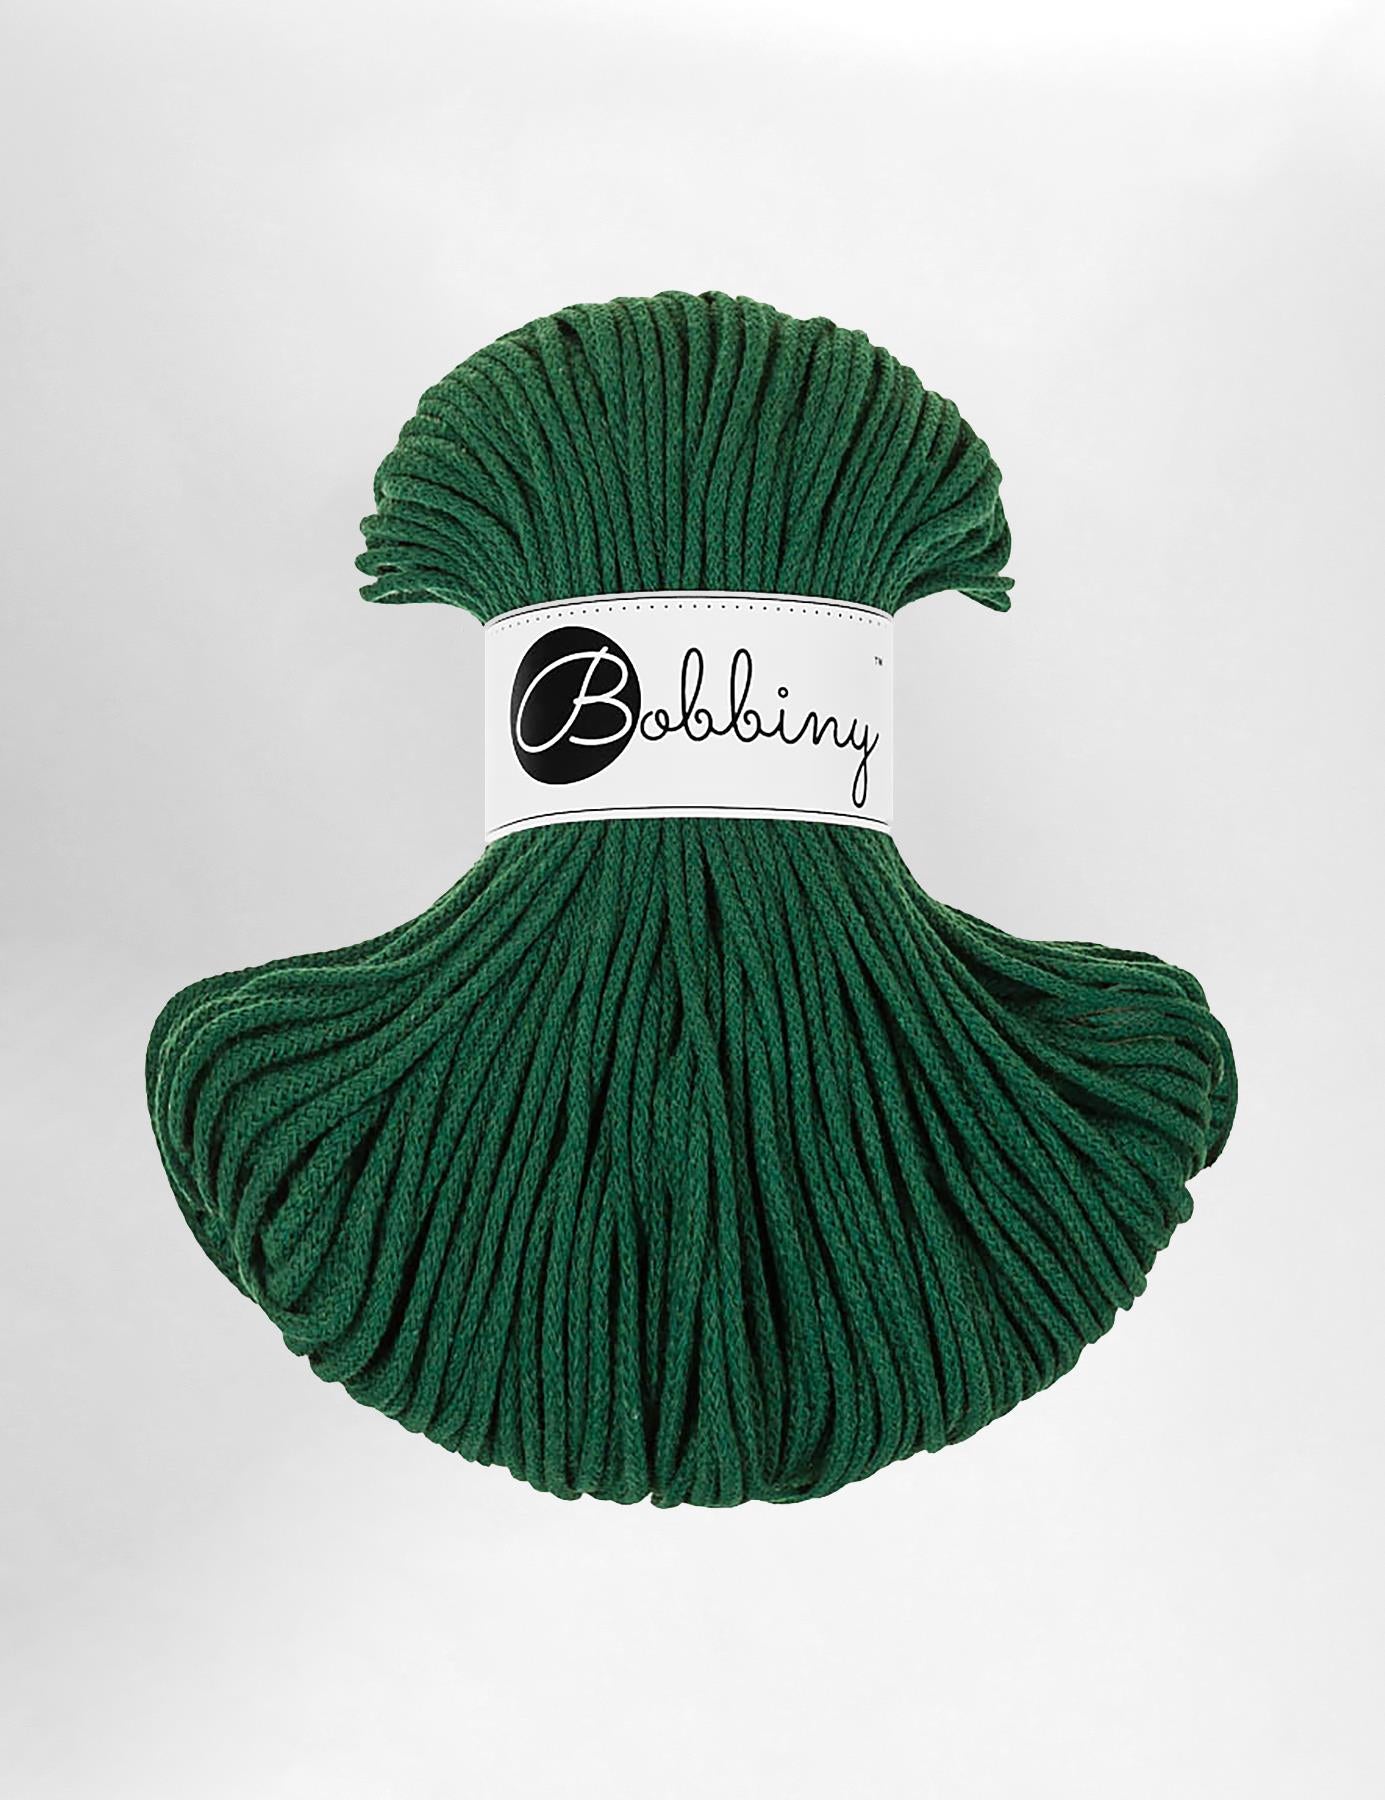 3mm Pine green recycled cotton macrame cord by Bobbiny (100m)